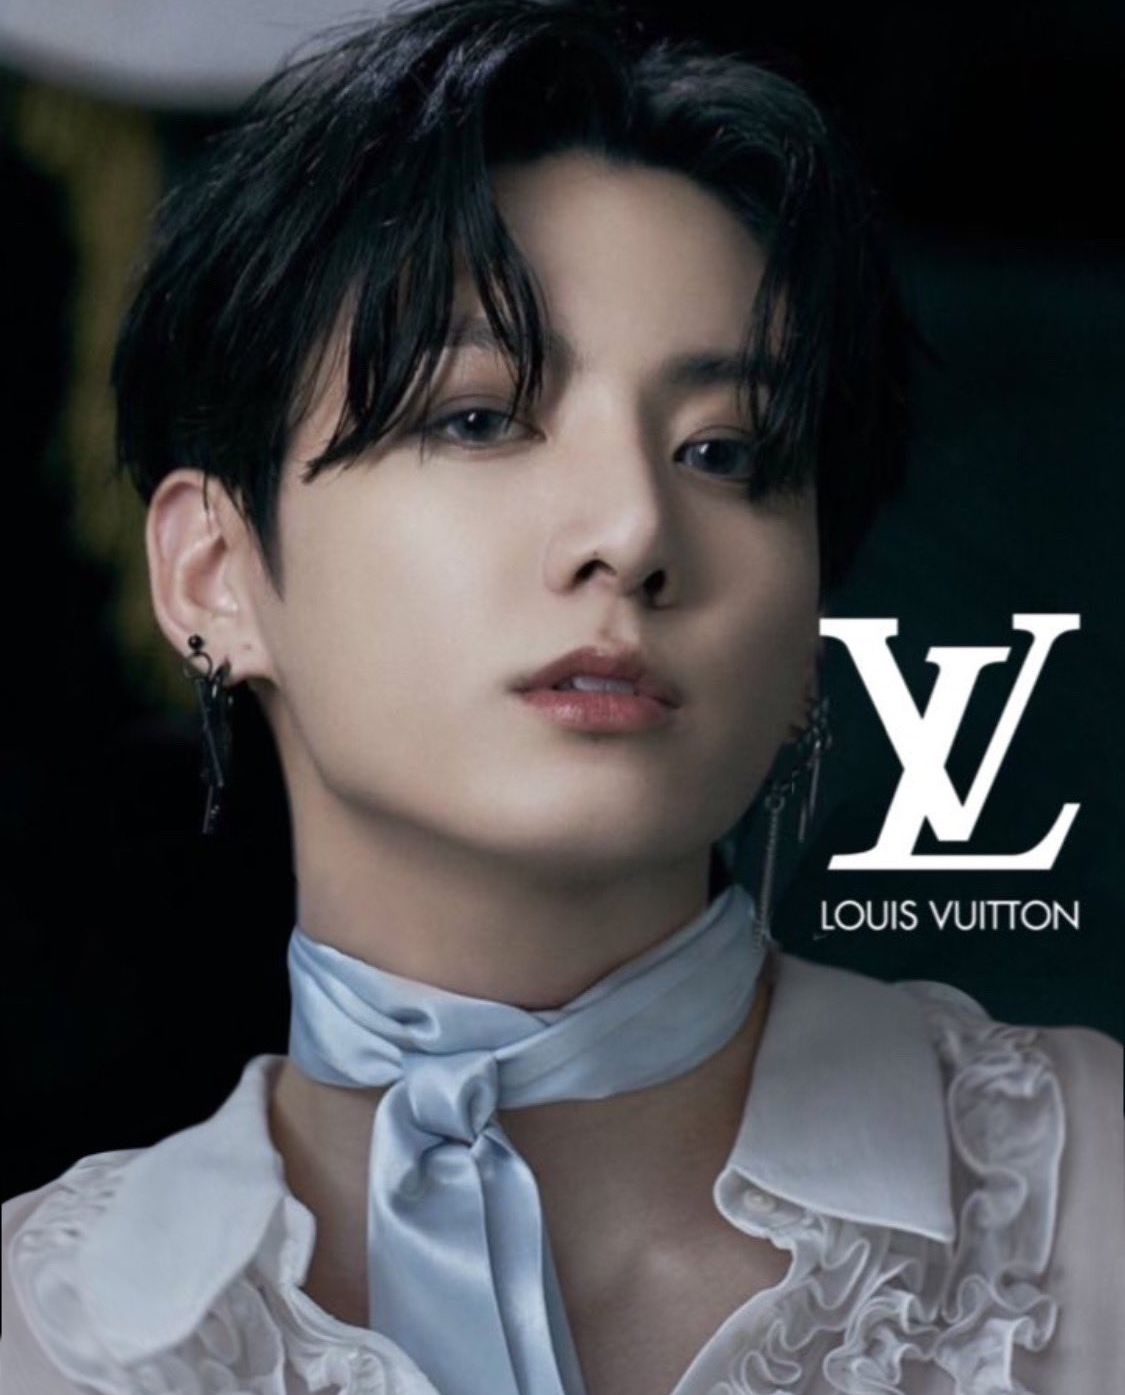 JUNGKOOK FOR LOUIS VUITTON - SNS KING, SOLD OUT KING & 6 Times BTS Jungkook  wore Louis Vuitton 